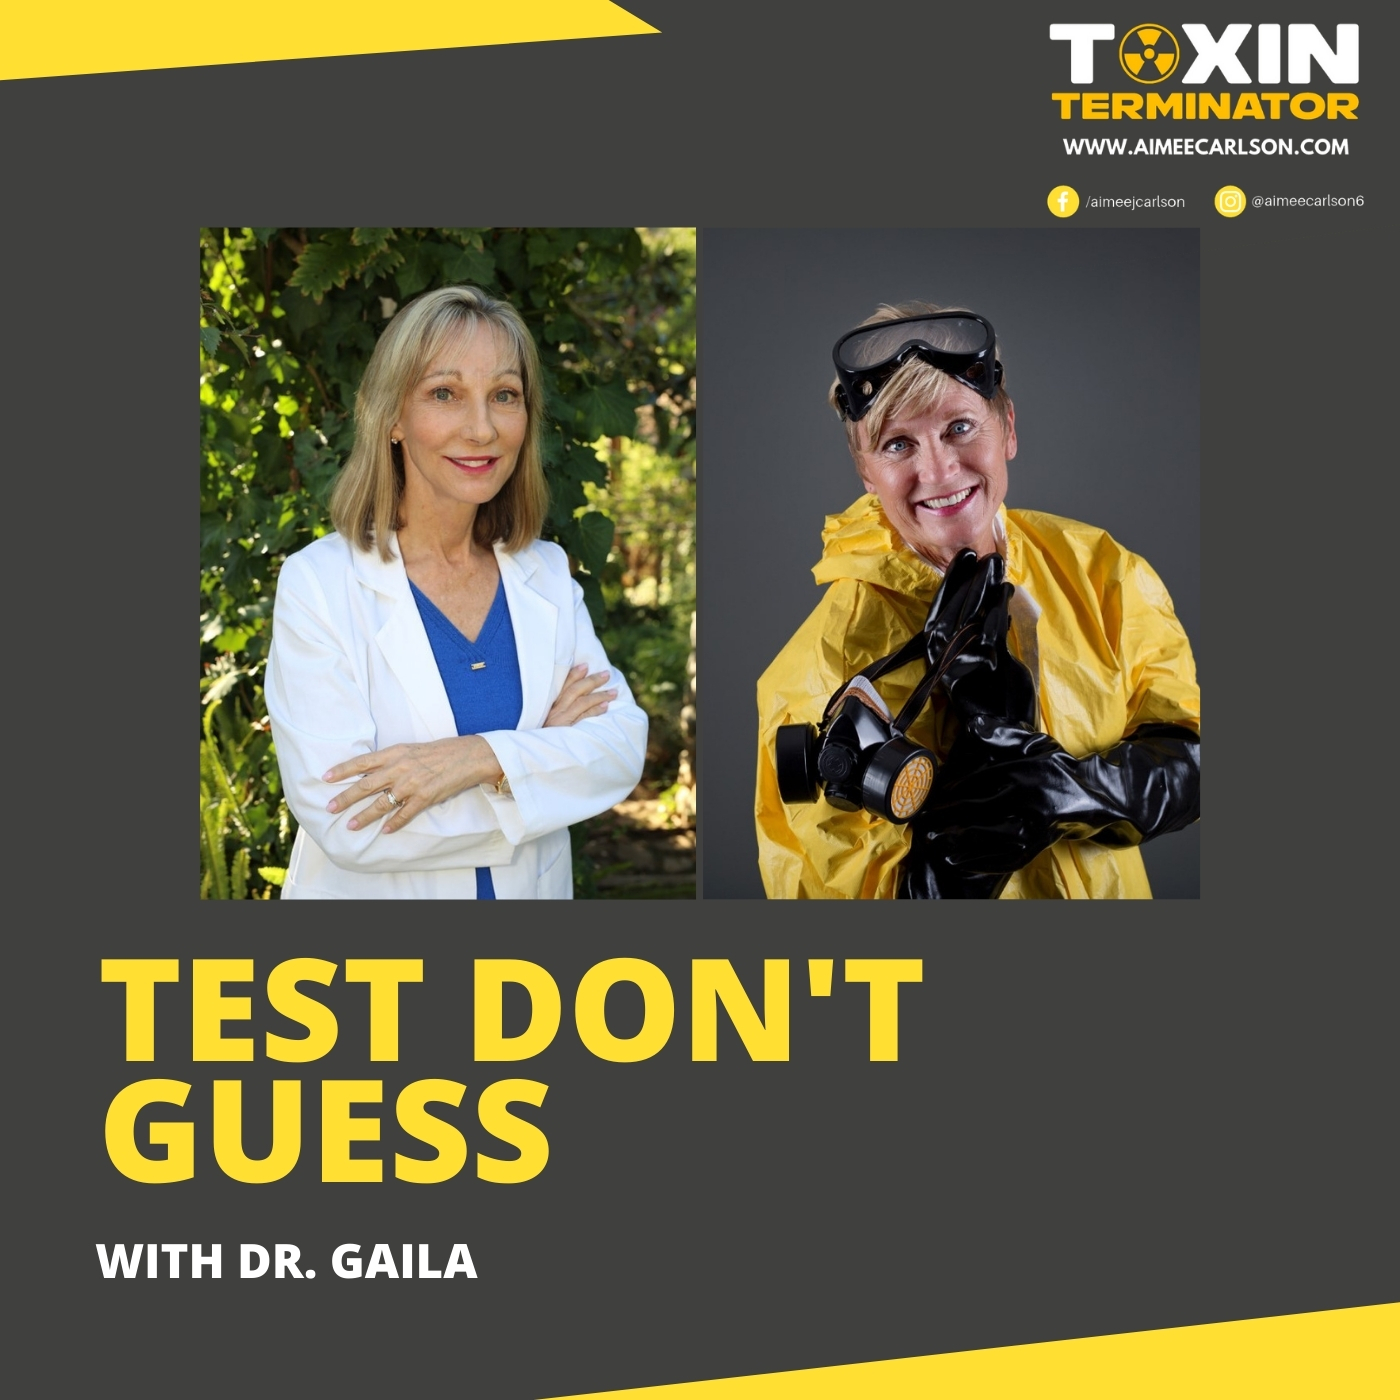 Test Don't Guess with Dr. Gaila